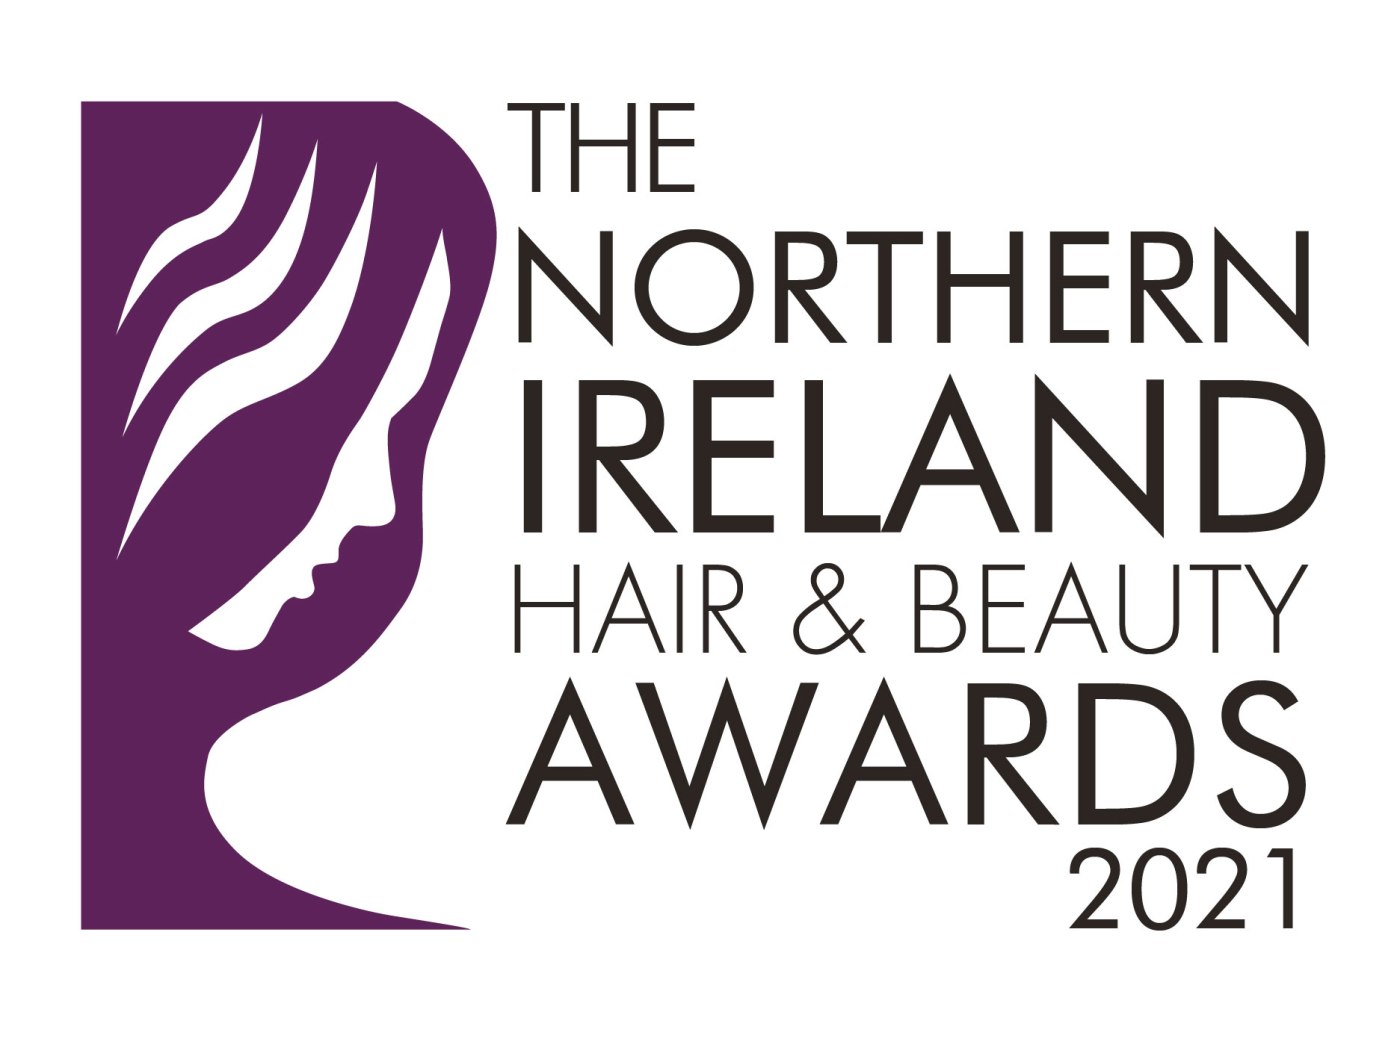 The winners of The Northern Ireland Hair & Beauty Awards 2022 are announced